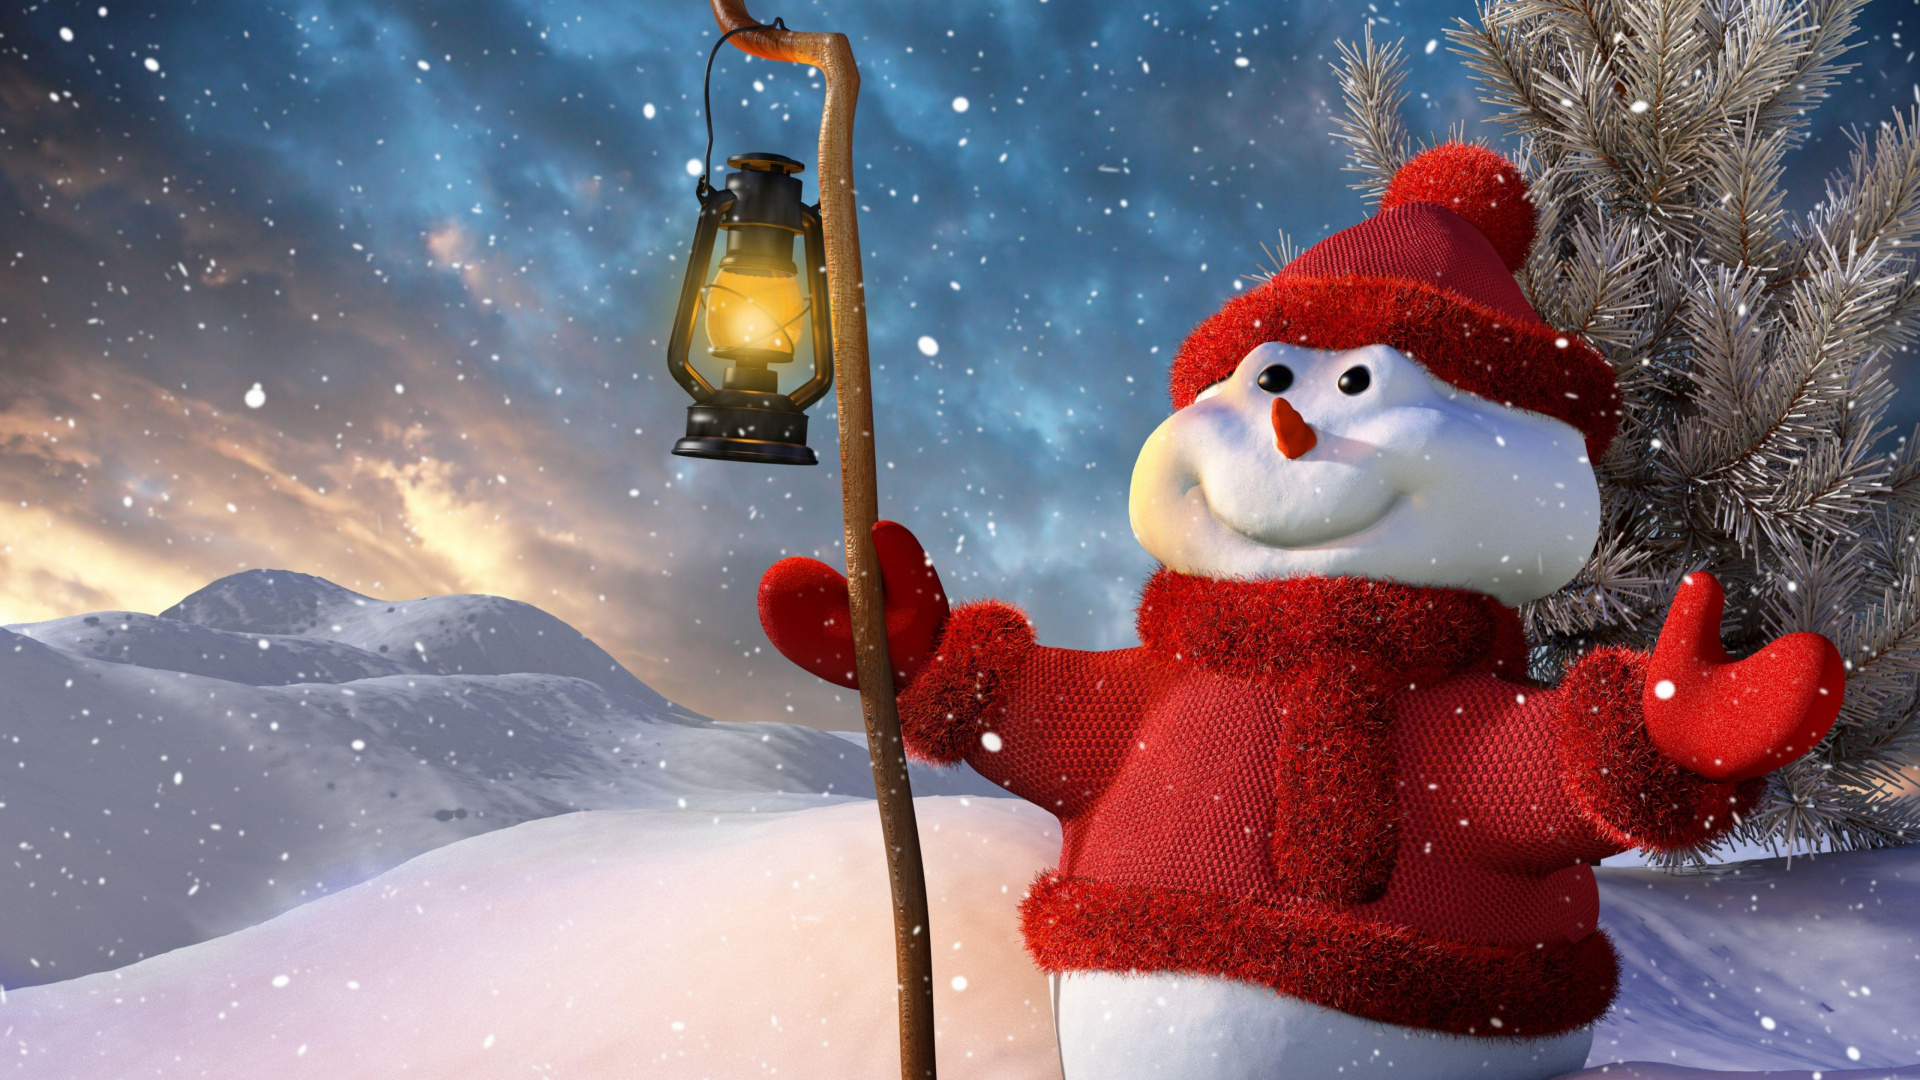 Snowman, Christmas, Space, Freezing, Christmas Tree. Wallpaper in 1920x1080 Resolution